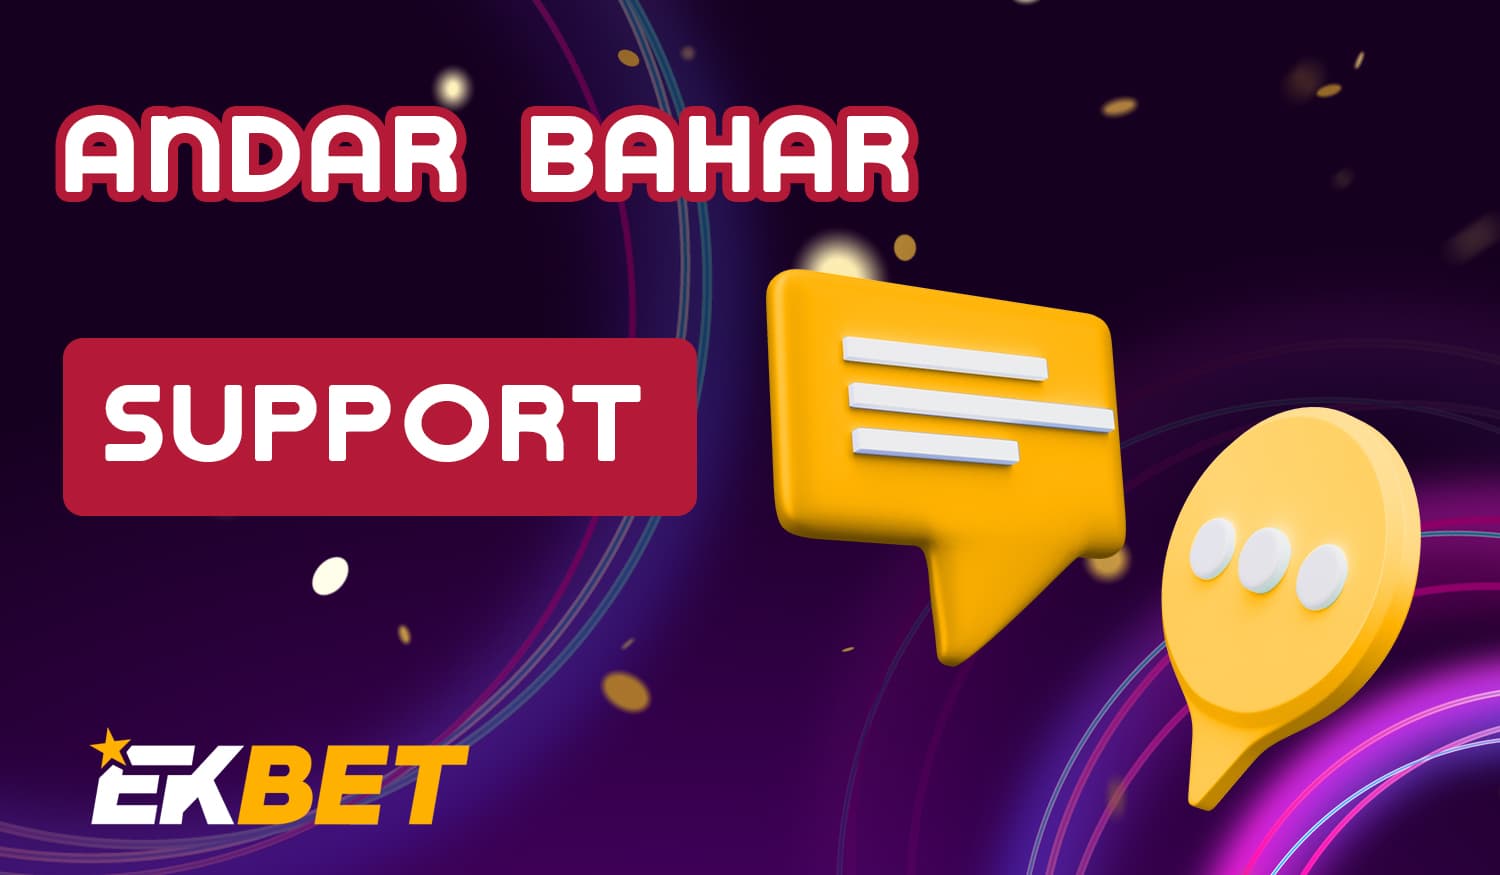 Ekbet support contacts for questions about Andar Bahar and payouts